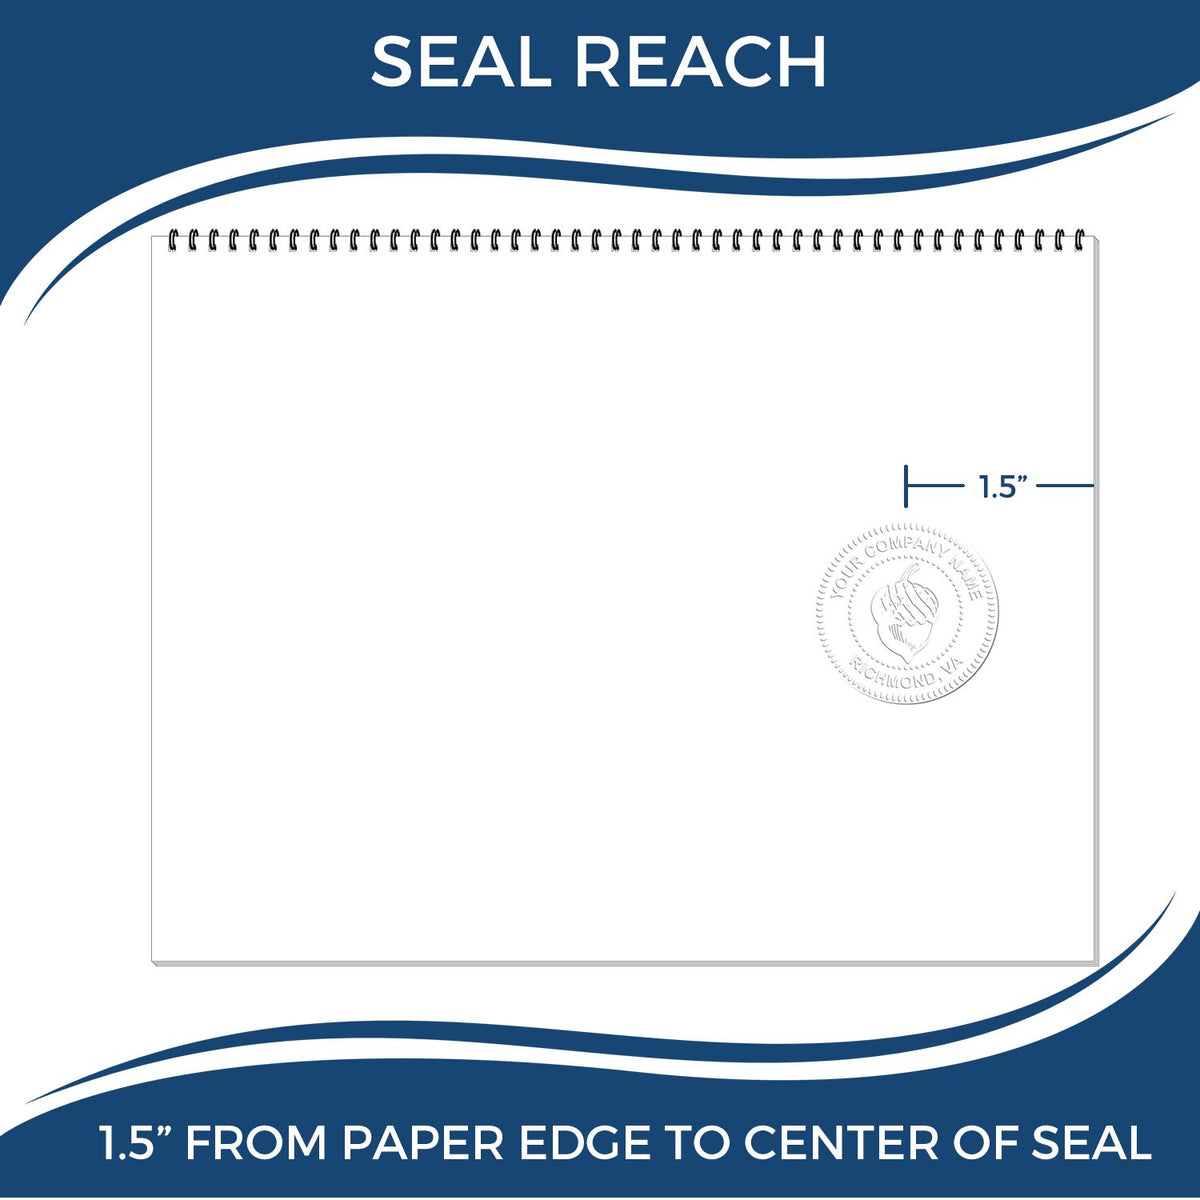 An infographic showing the seal reach which is represented by a ruler and a miniature seal image of the Gift Nevada Land Surveyor Seal